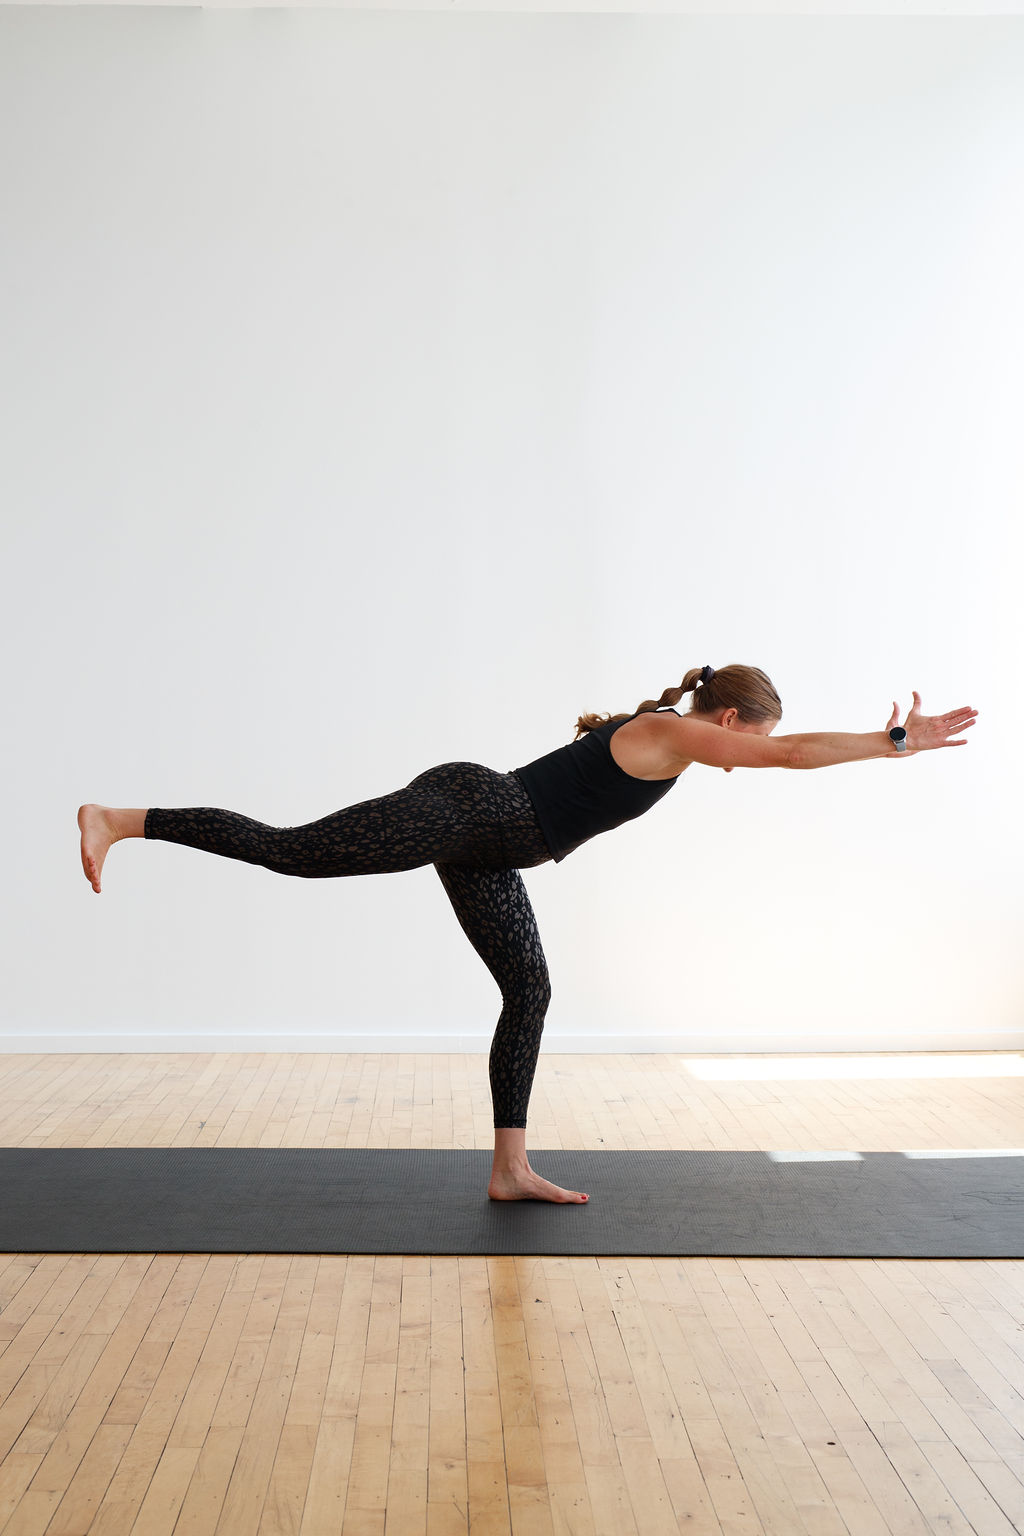 5 Poses of Yoga: Plank Pose